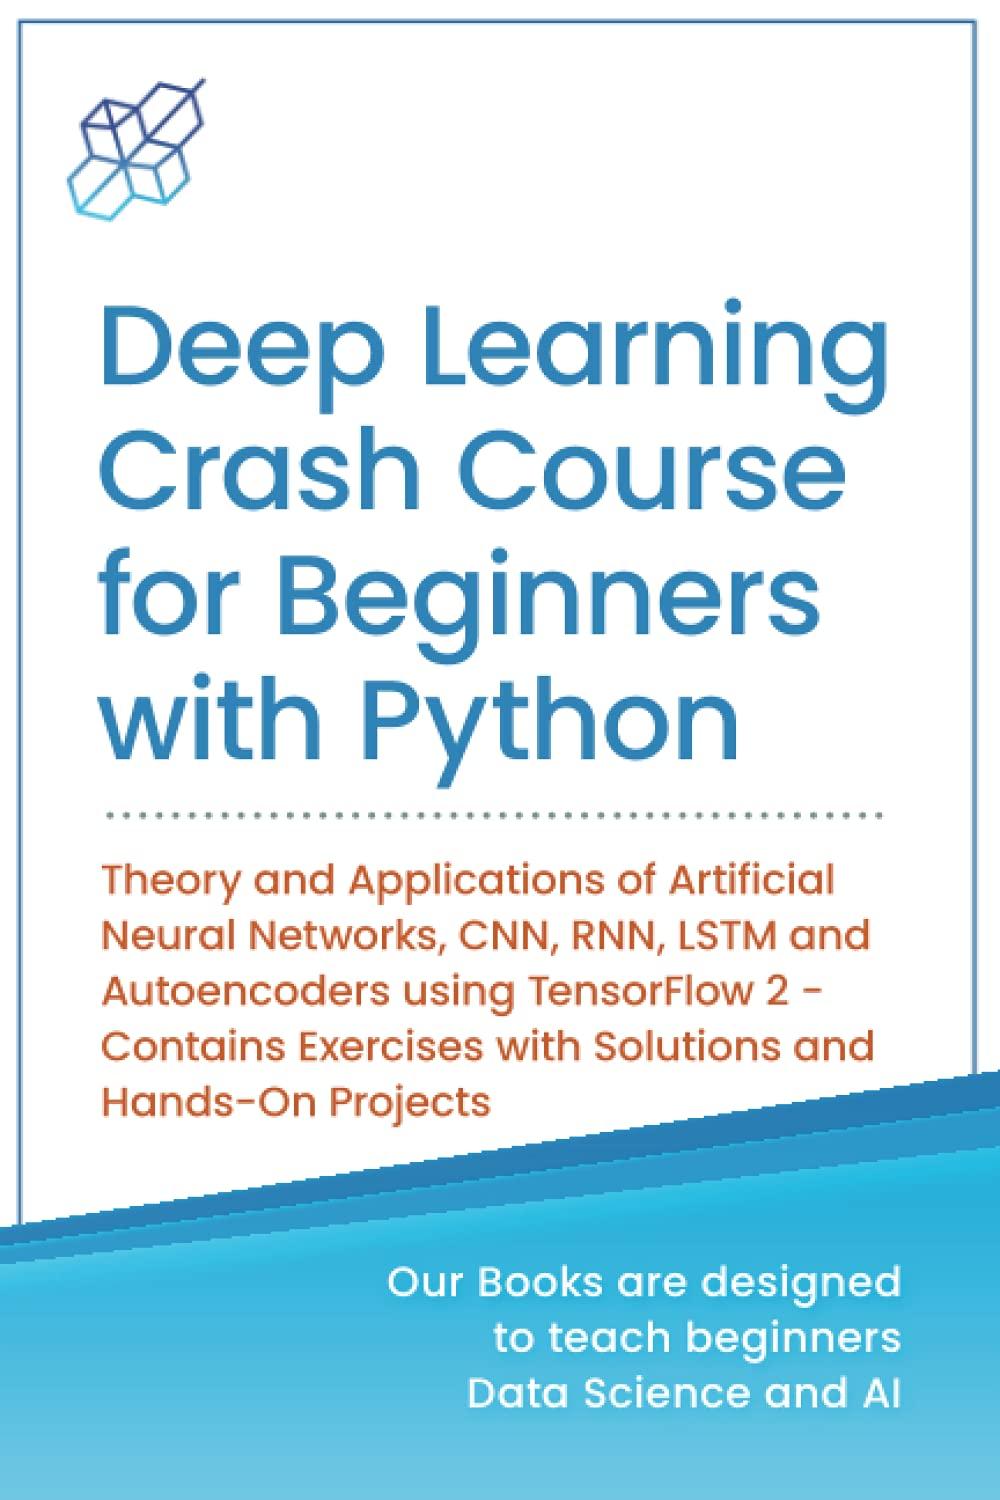 deep learning crash course for beginners with python theory and applications of artificial neural networks 